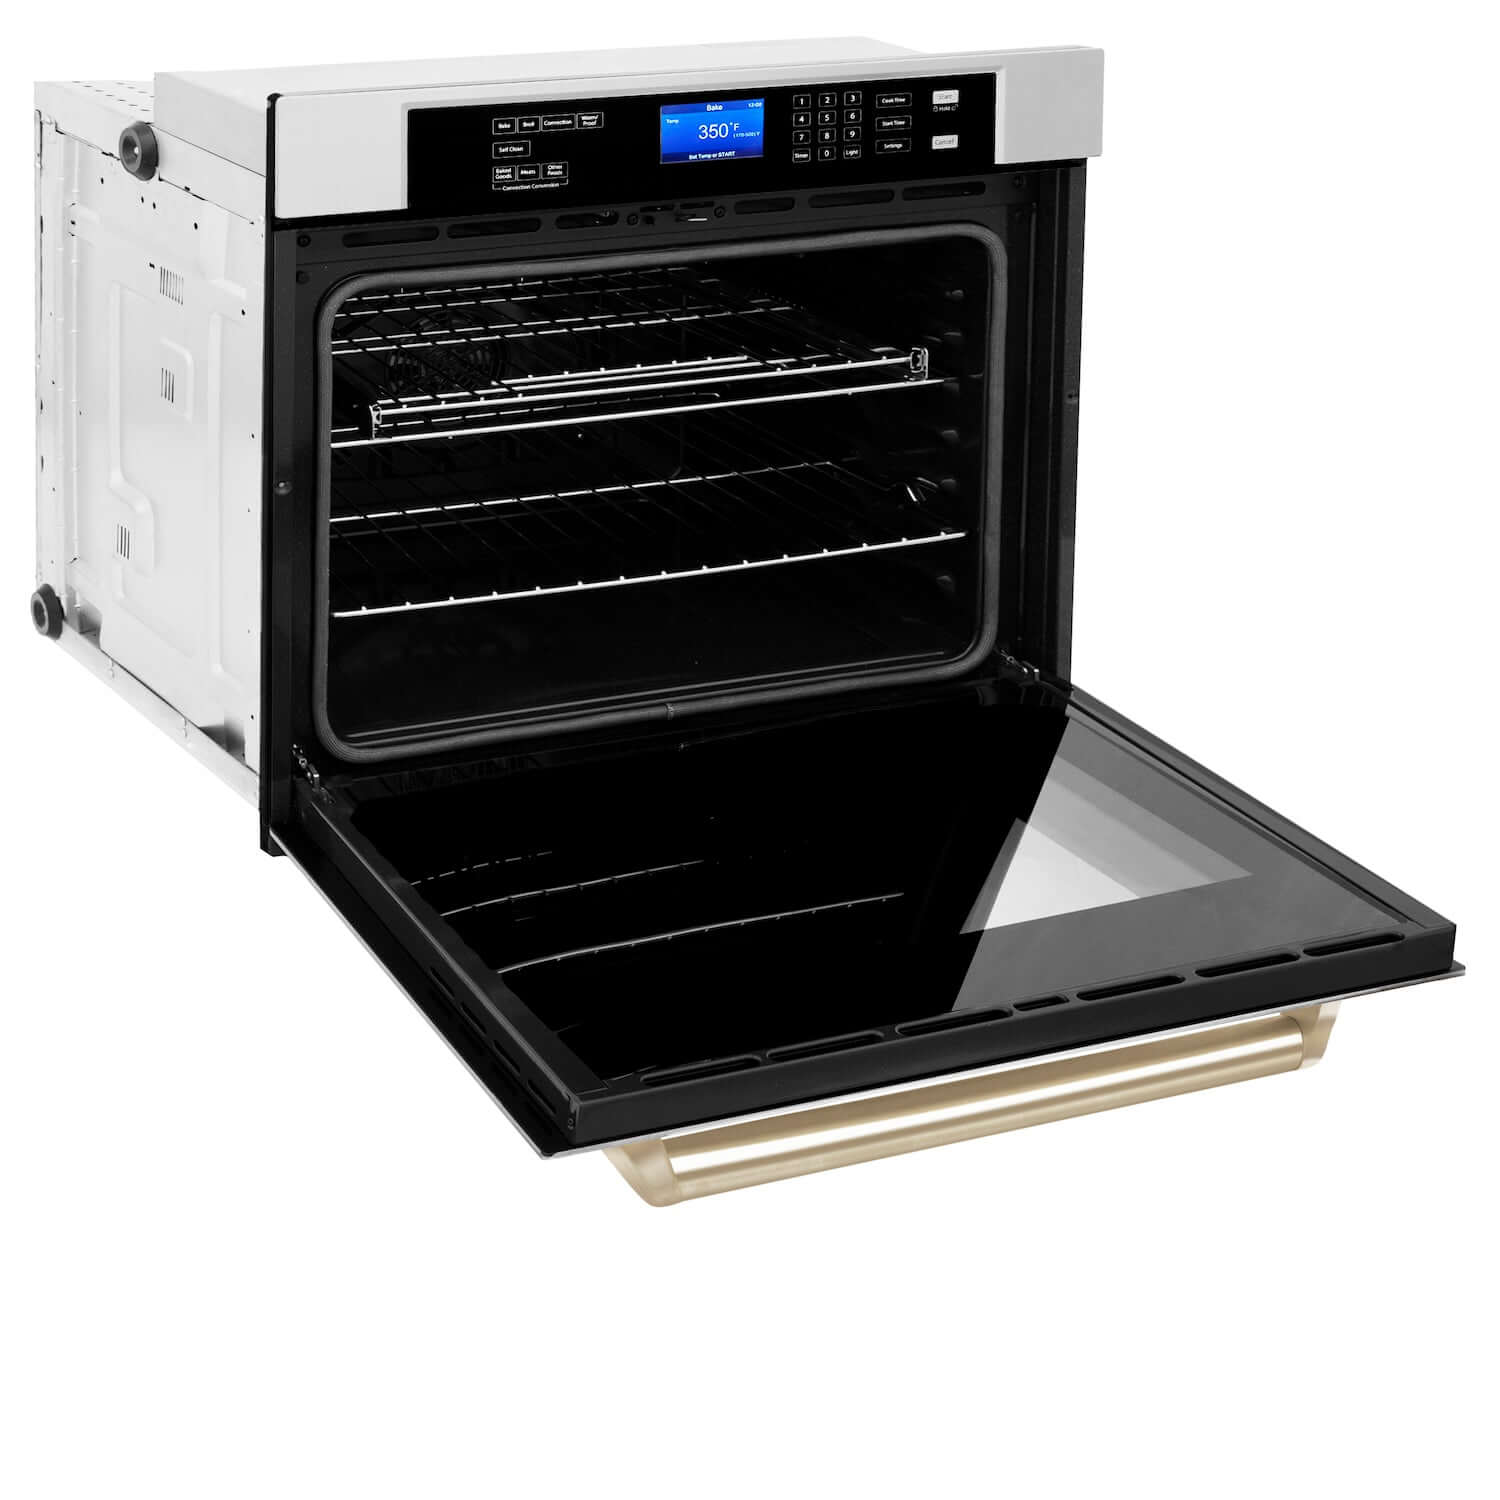 ZLINE Autograph Edition 30 in. Electric Single Wall Oven with Self Clean and True Convection in Stainless Steel and Polished Gold Accents (AWSZ-30-G)